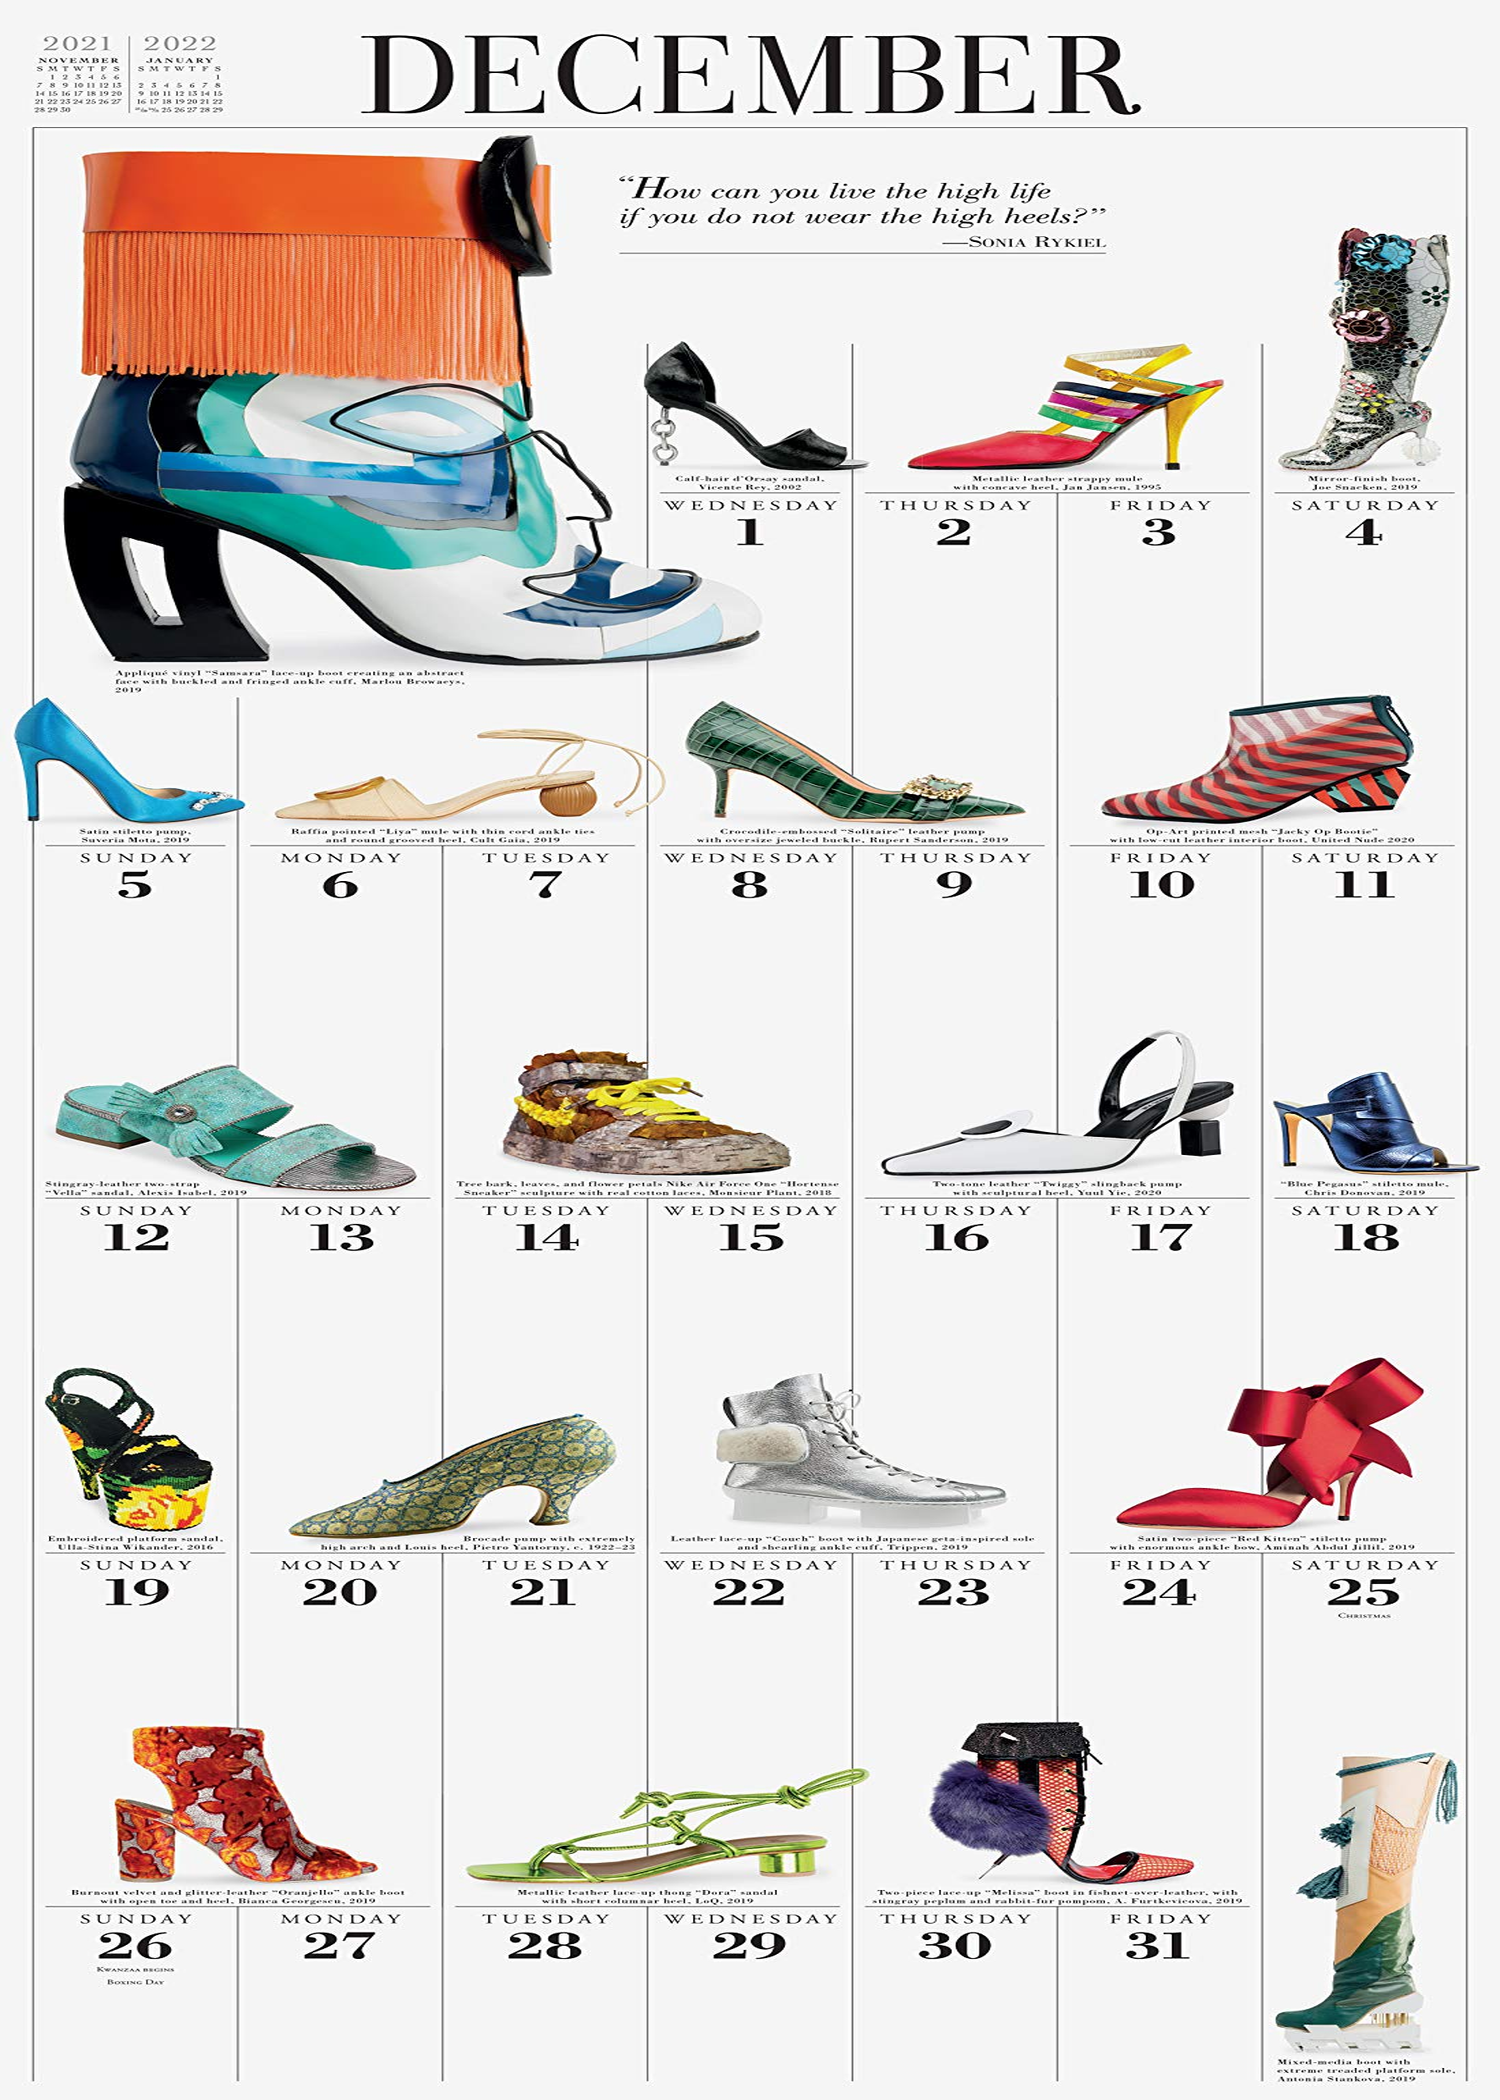 365 Days of Shoes Picture-A-Day Wall Calendar